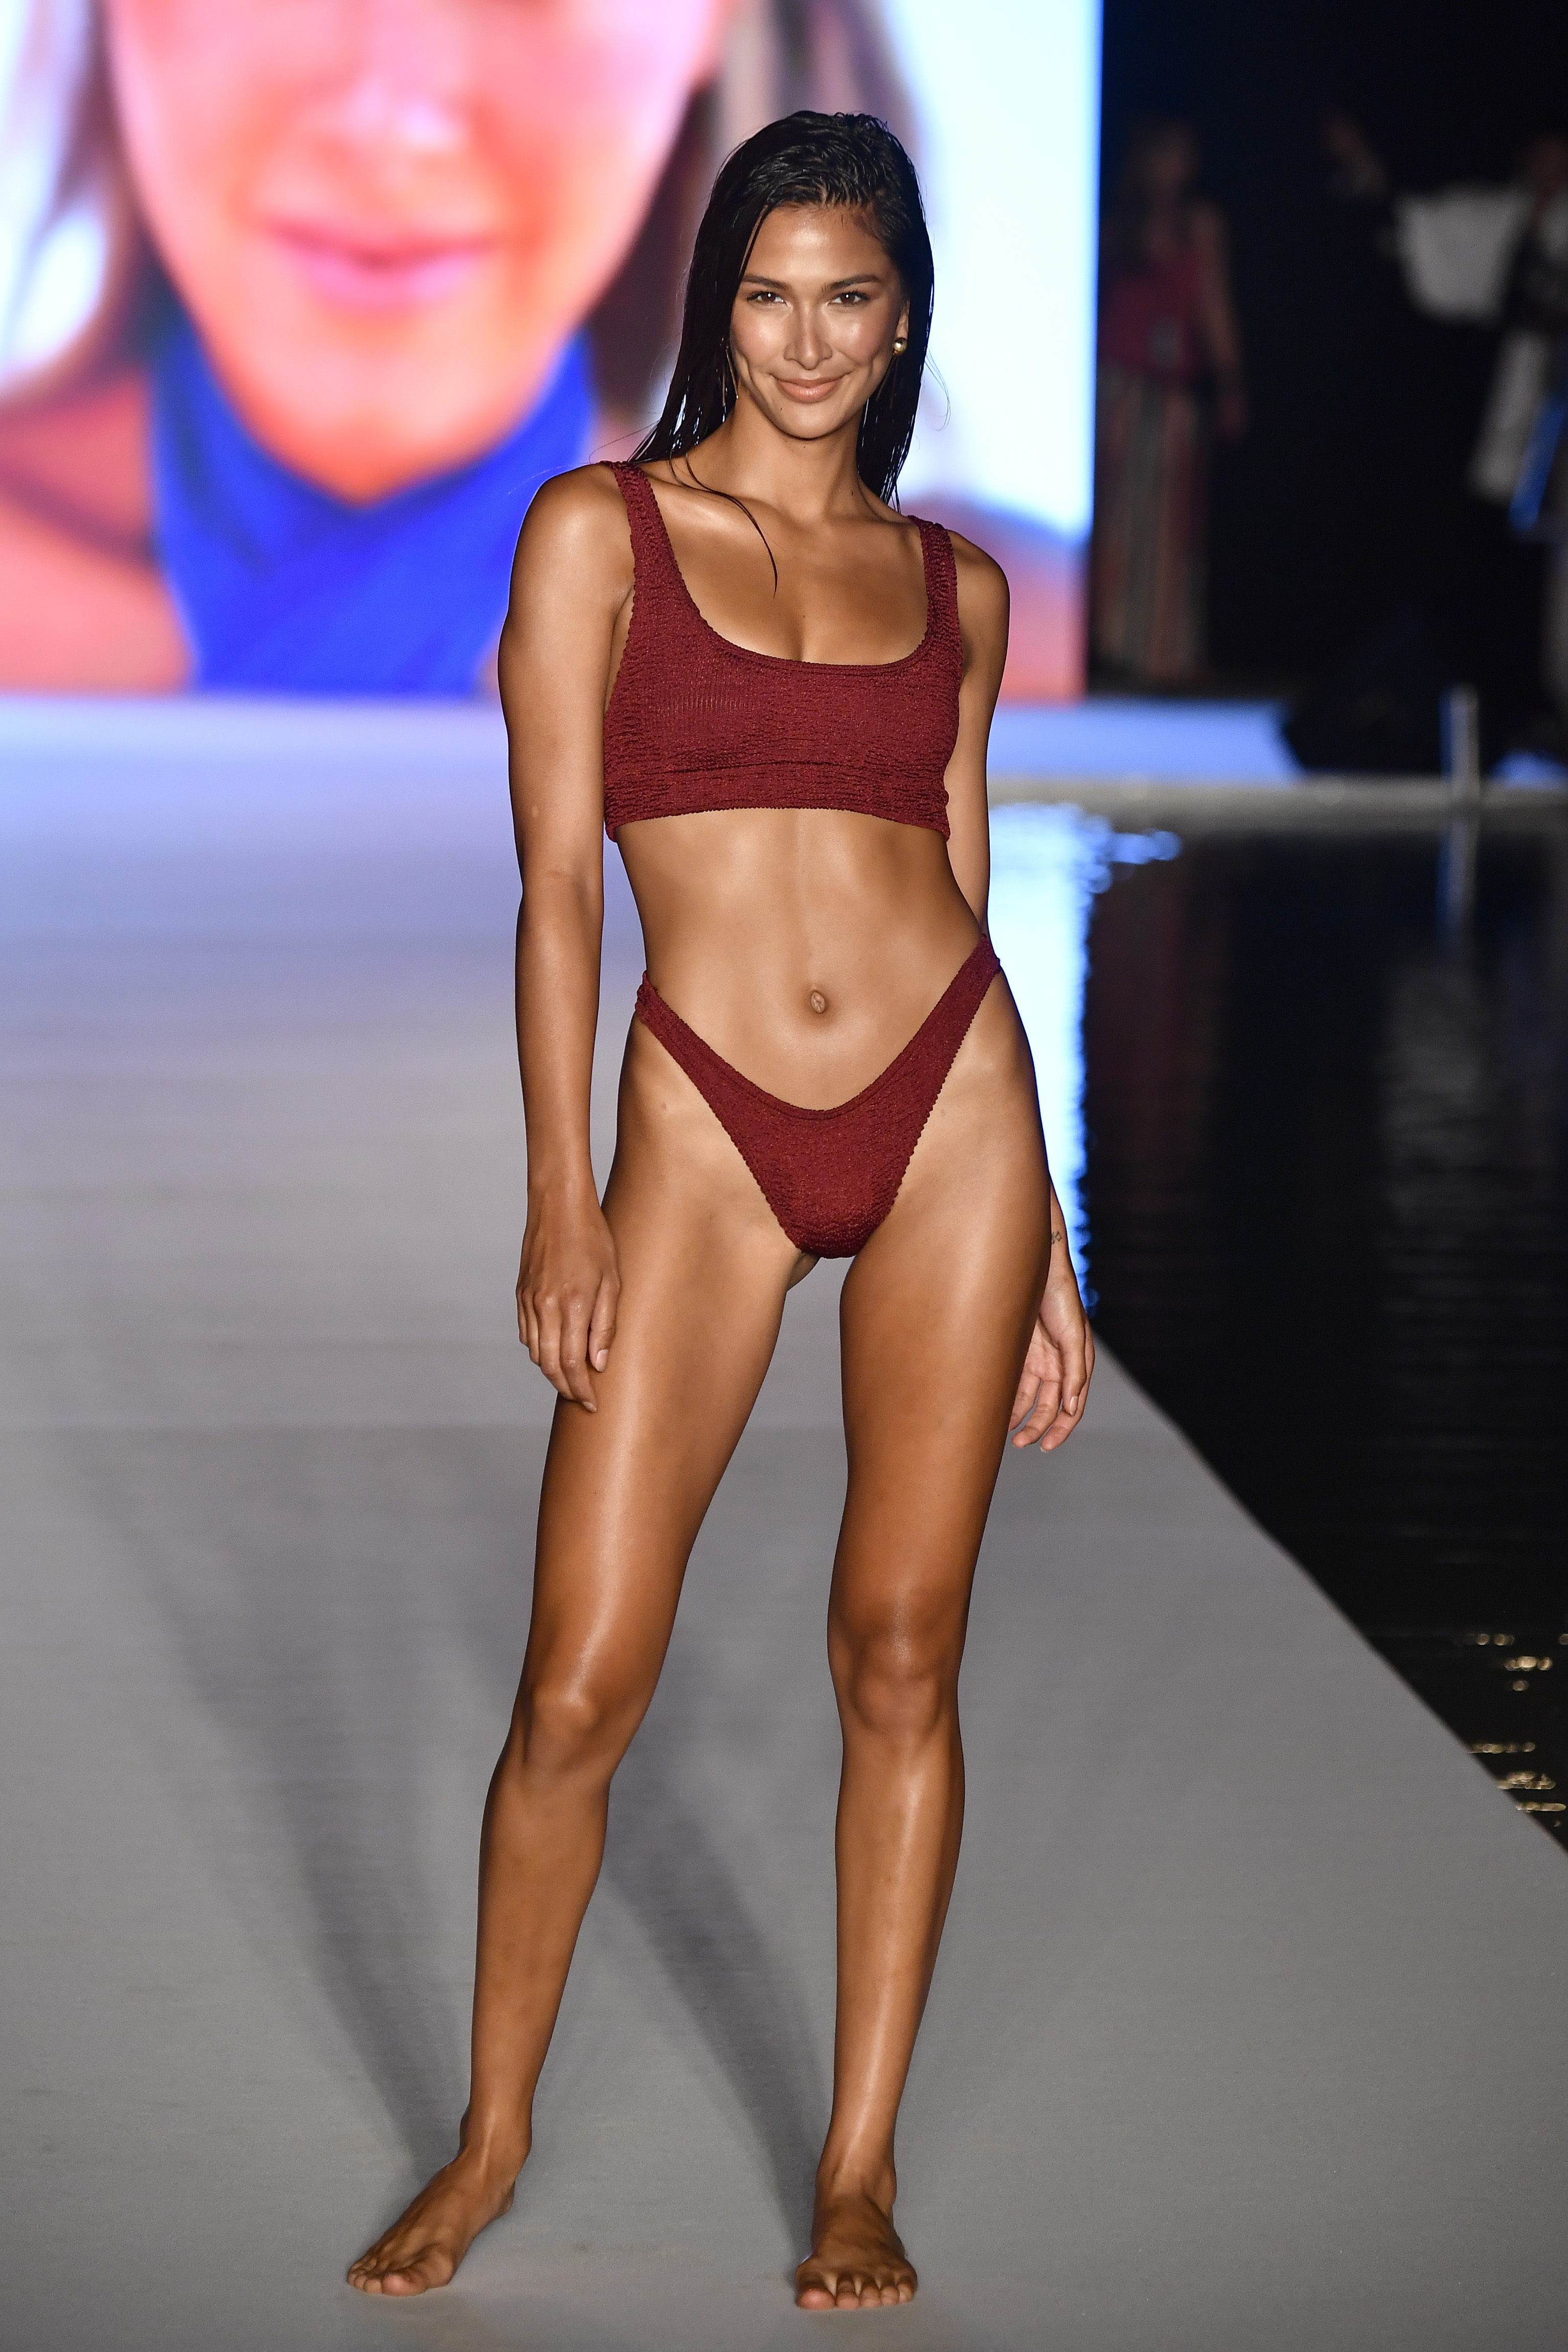 2018 Sports Illustrated Swimsuit at PARAISO During Miami Swim Week, W